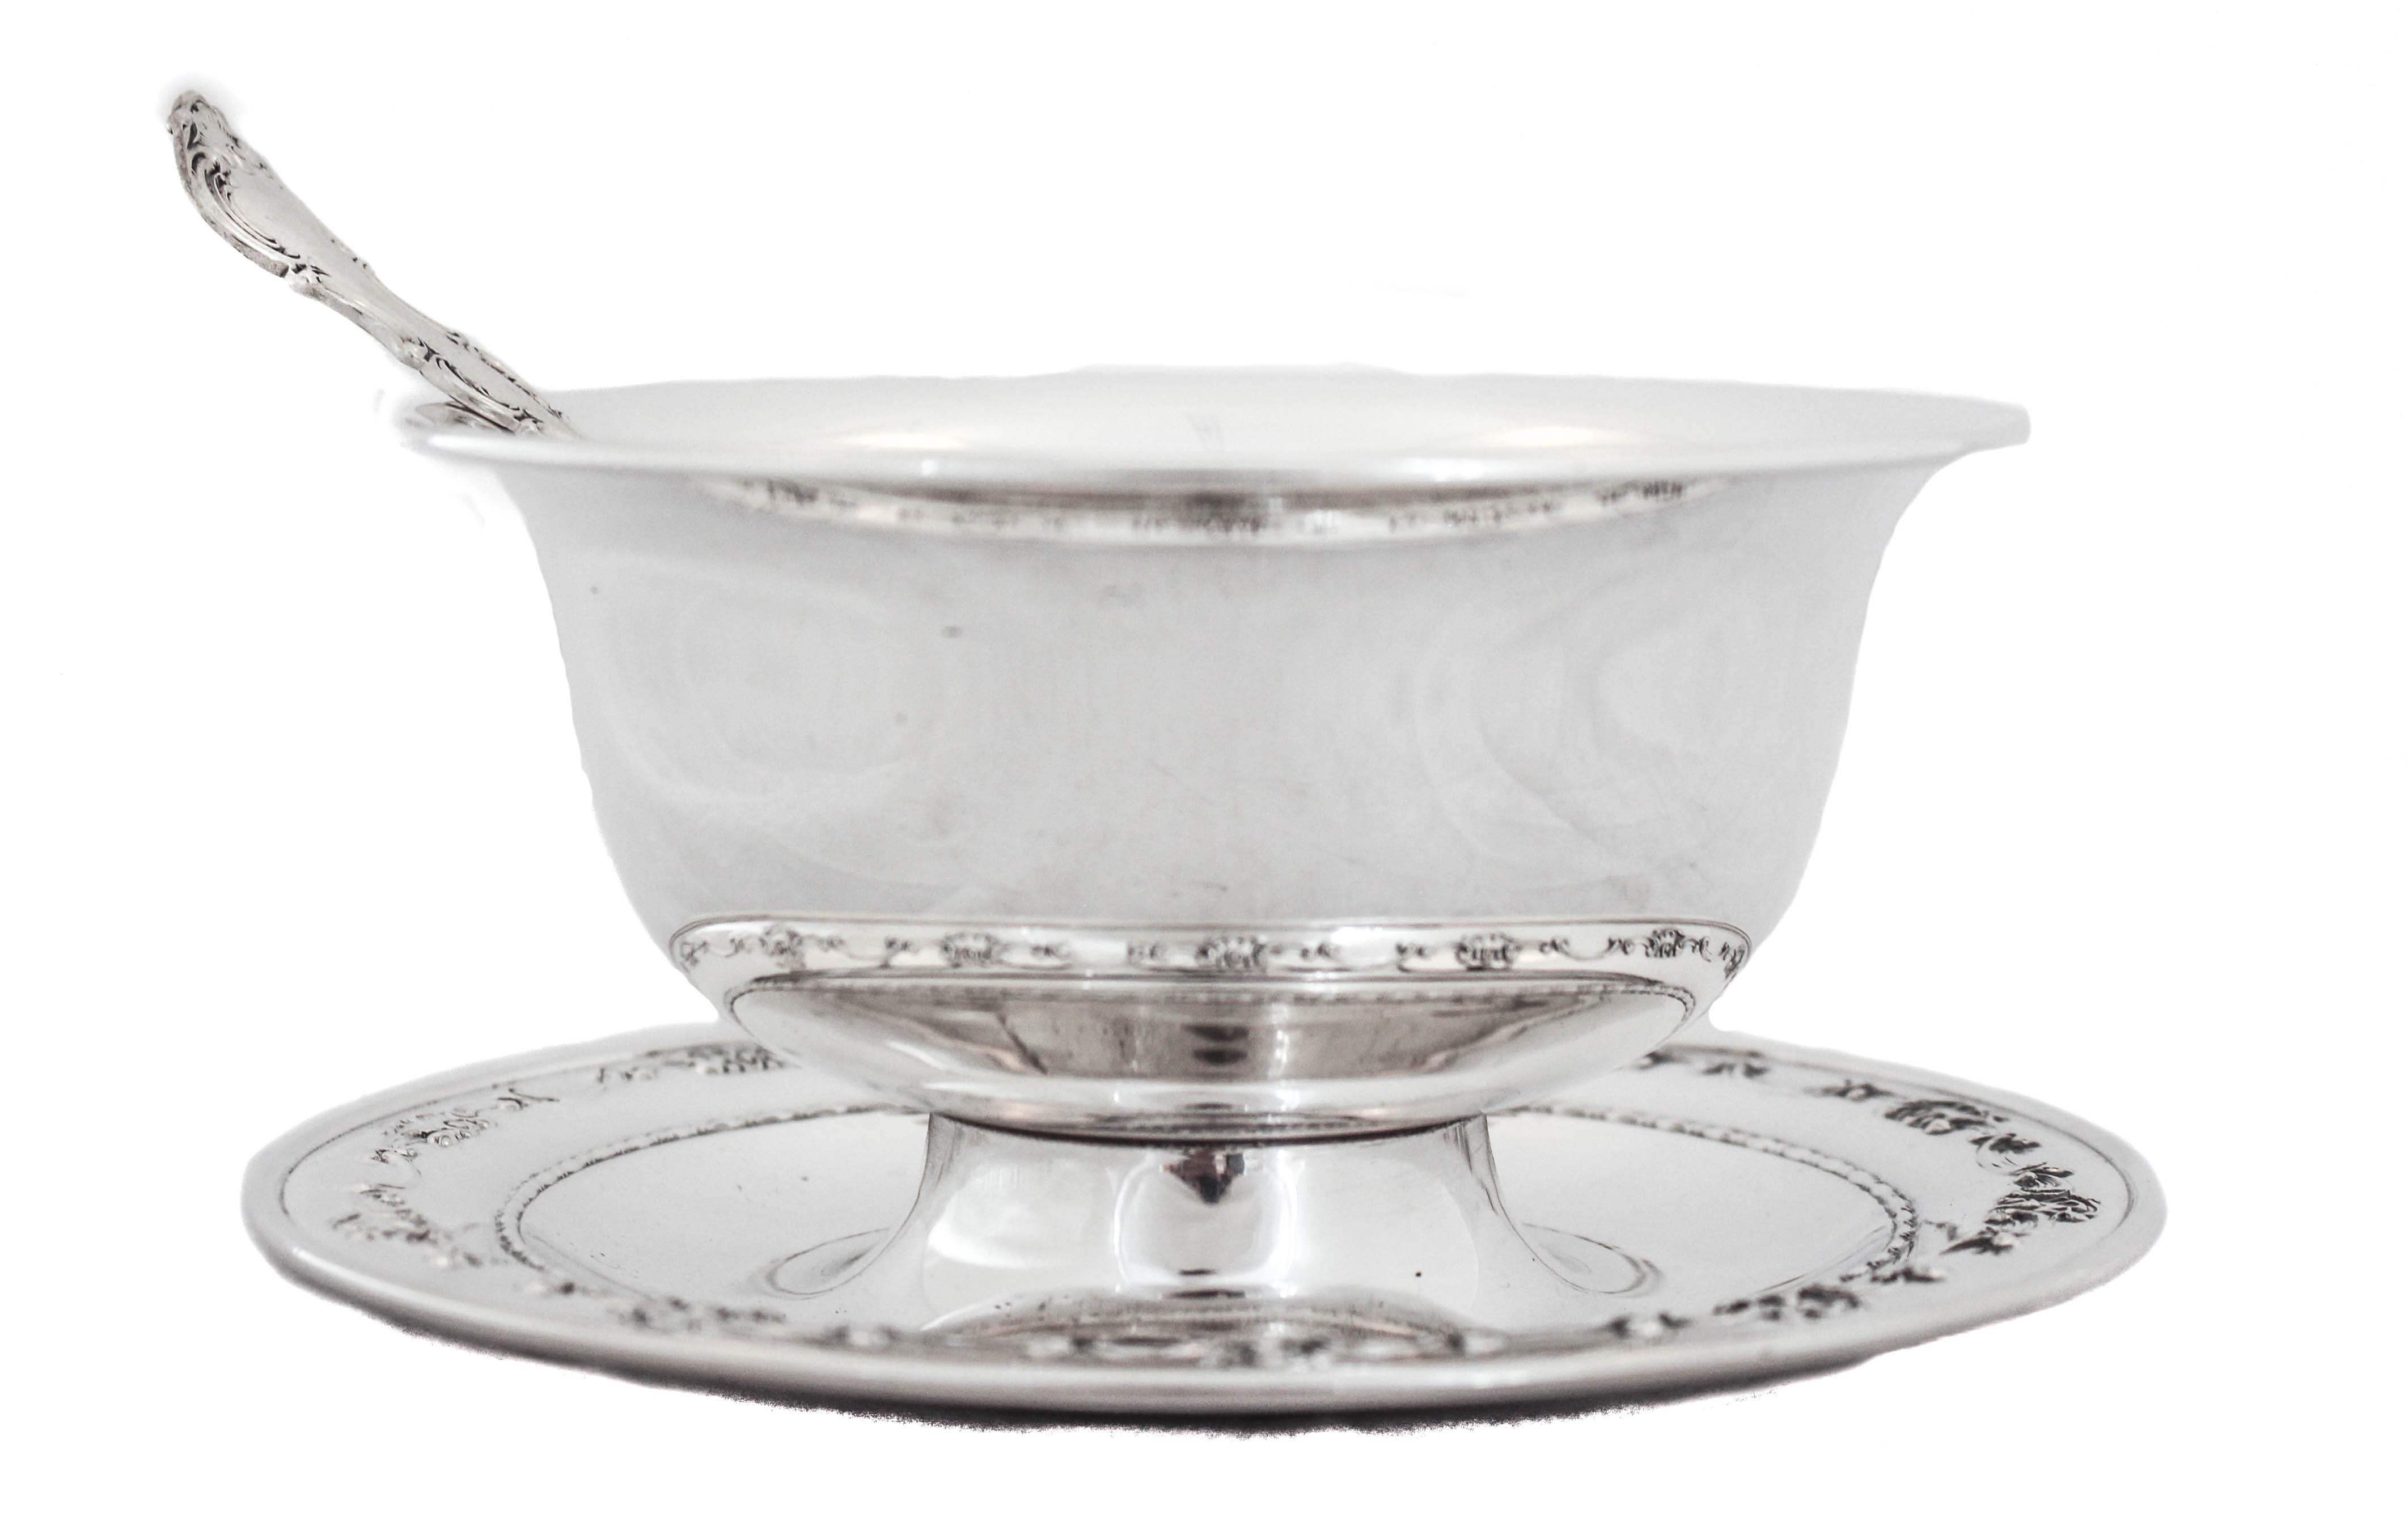 Being offered is a sterling silver sauce-bowl and spoon in the Strasbourg pattern by Gorham Silversmiths.  The Strasbourg pattern is known for its scalloped design as seen around the rim of the plate and on the serving spoon.  The bowl of the spoon